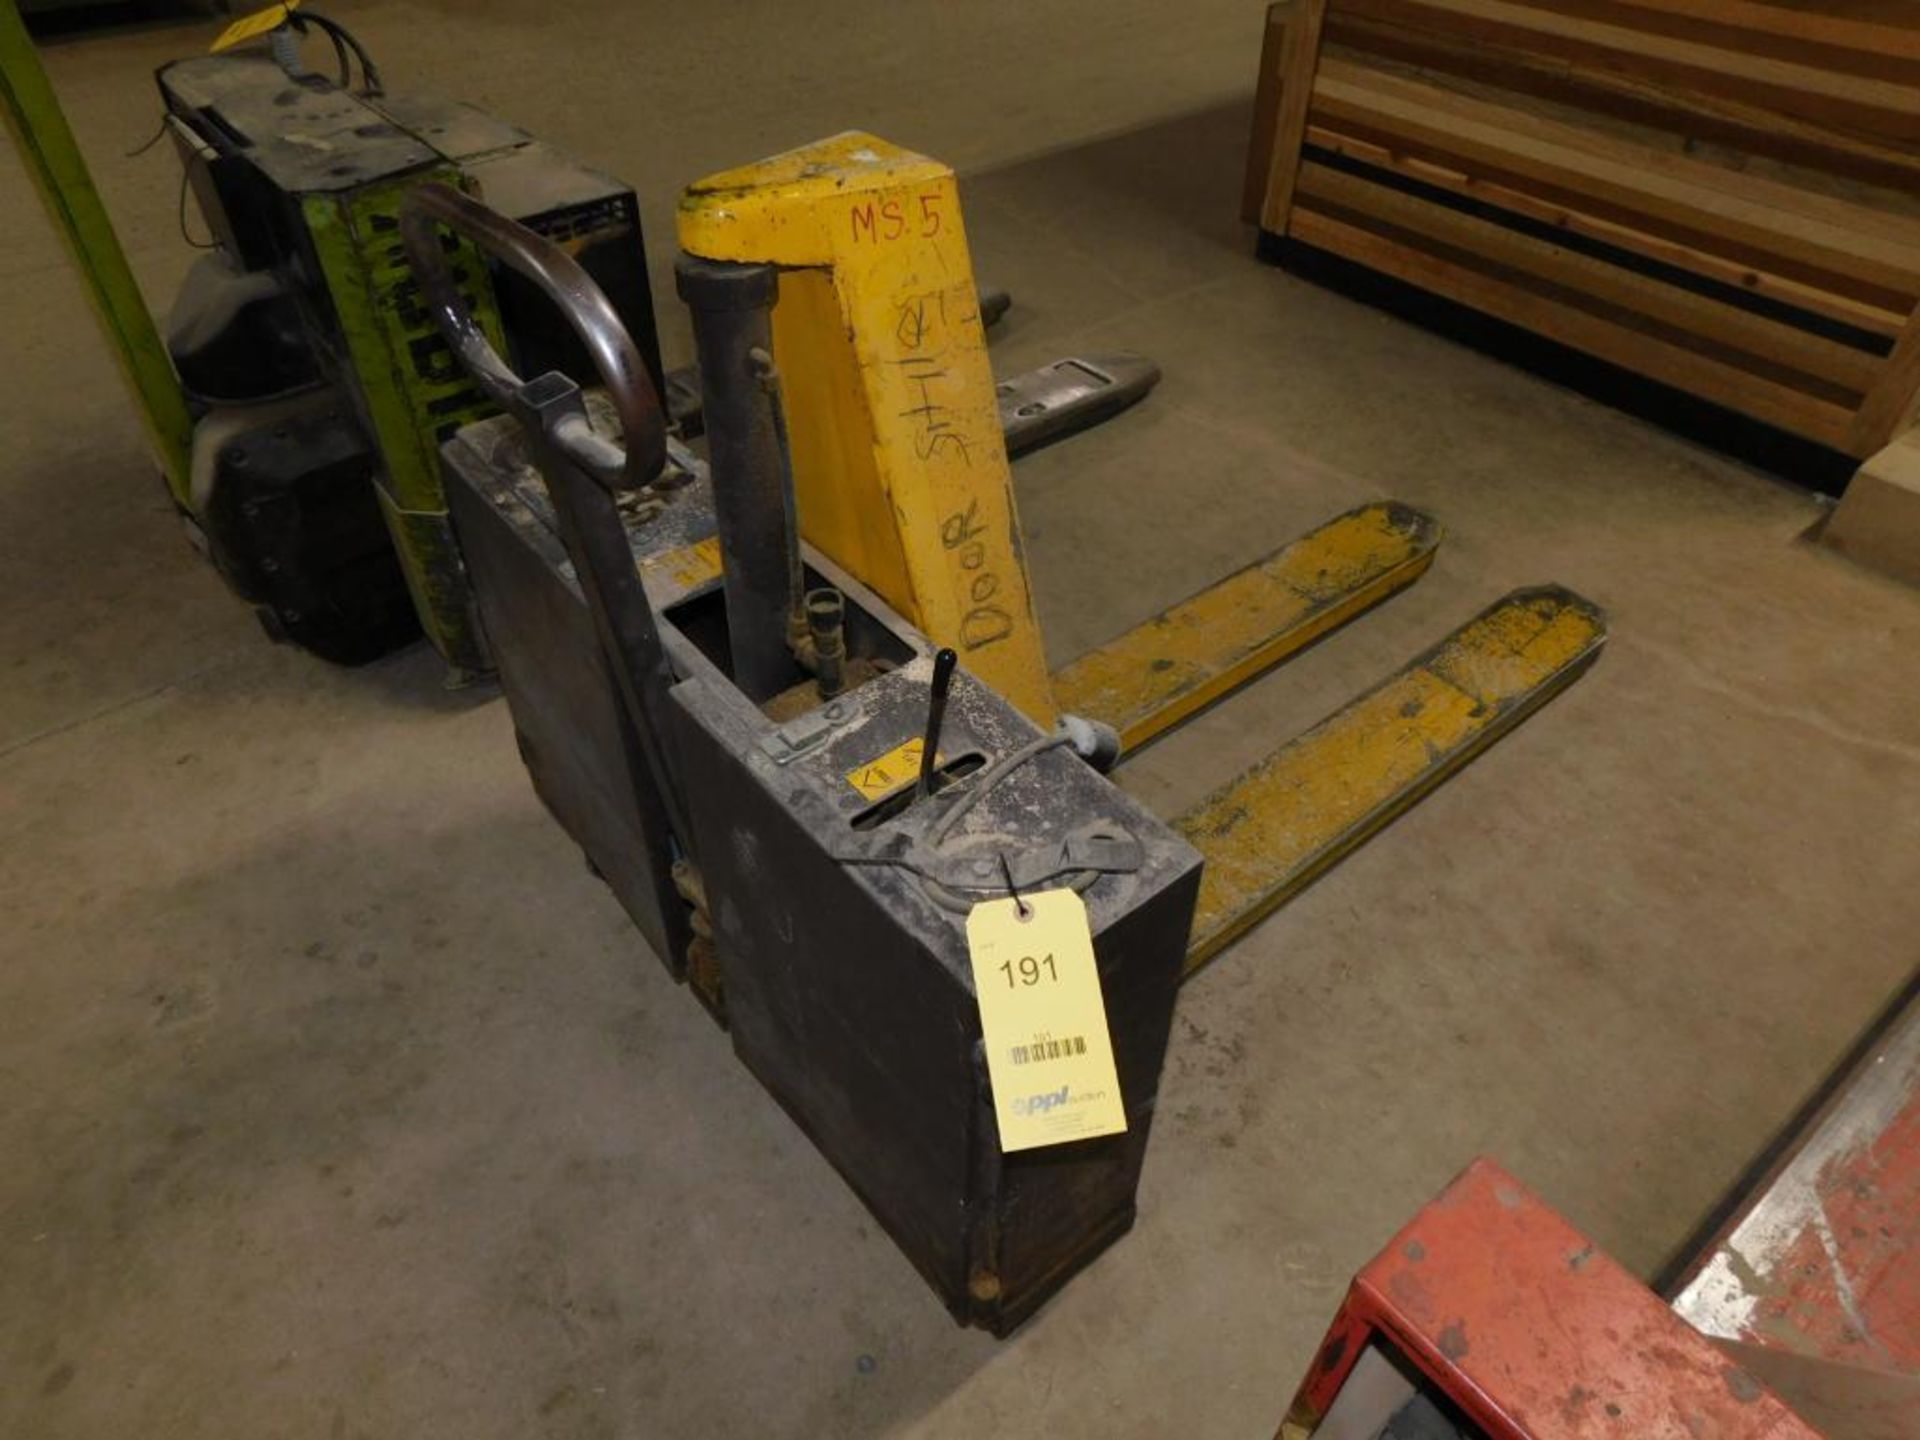 Lift-Rite Walk Behind Electro-Hydraulic Pallet Jack, Model H-25-E, S/N 761, 760, 12v System, 2500 lb - Image 2 of 5